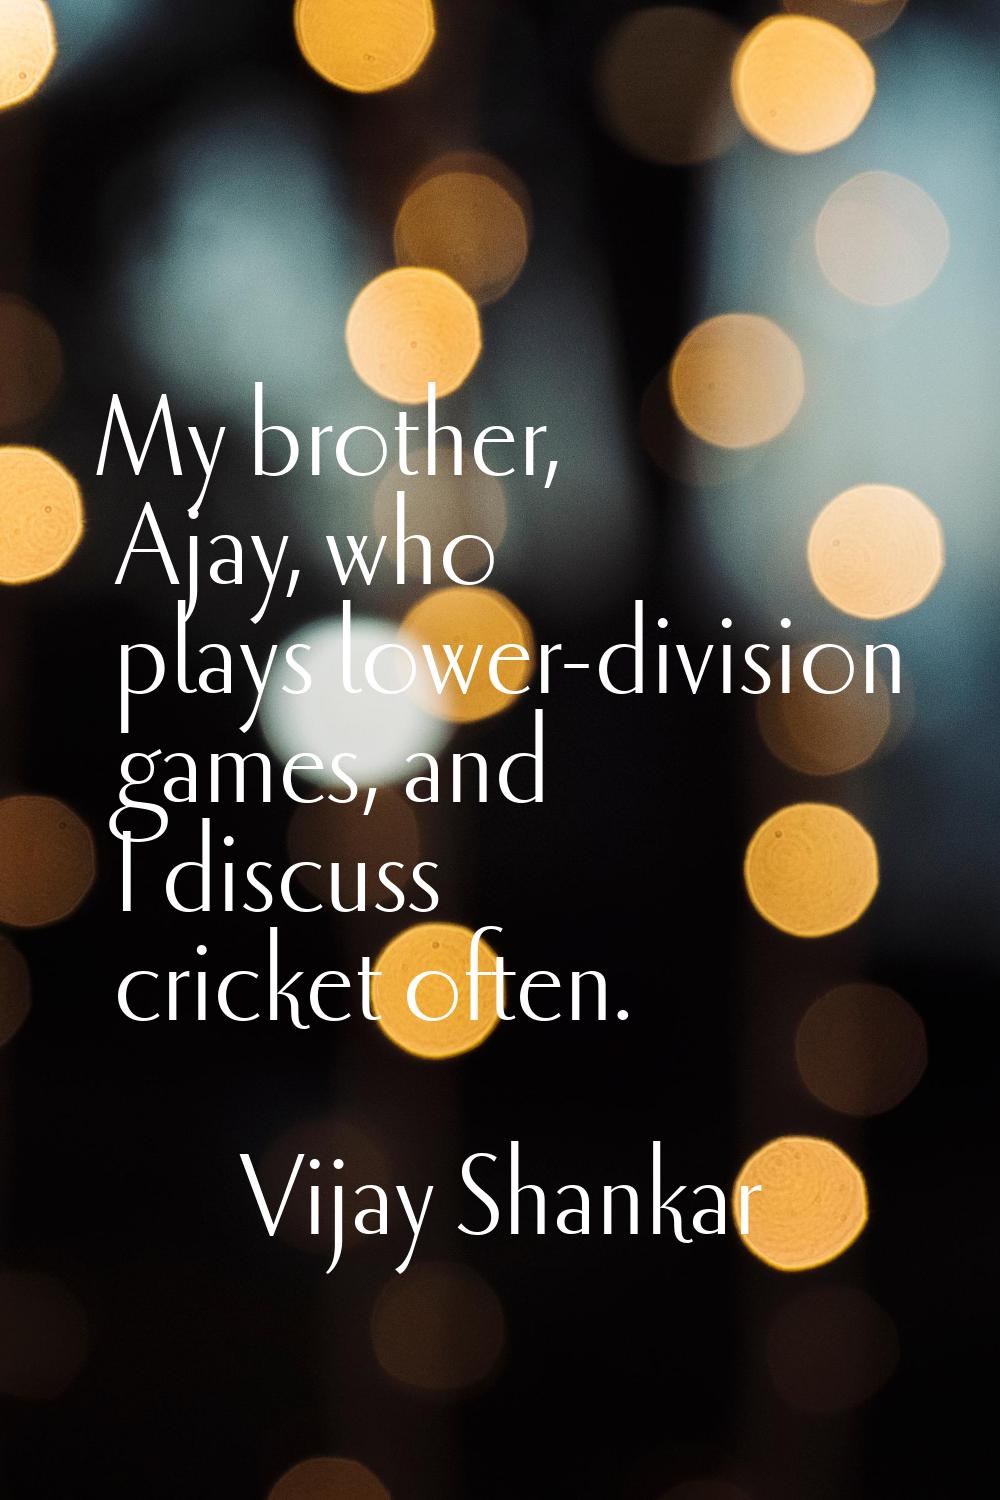 My brother, Ajay, who plays lower-division games, and I discuss cricket often.